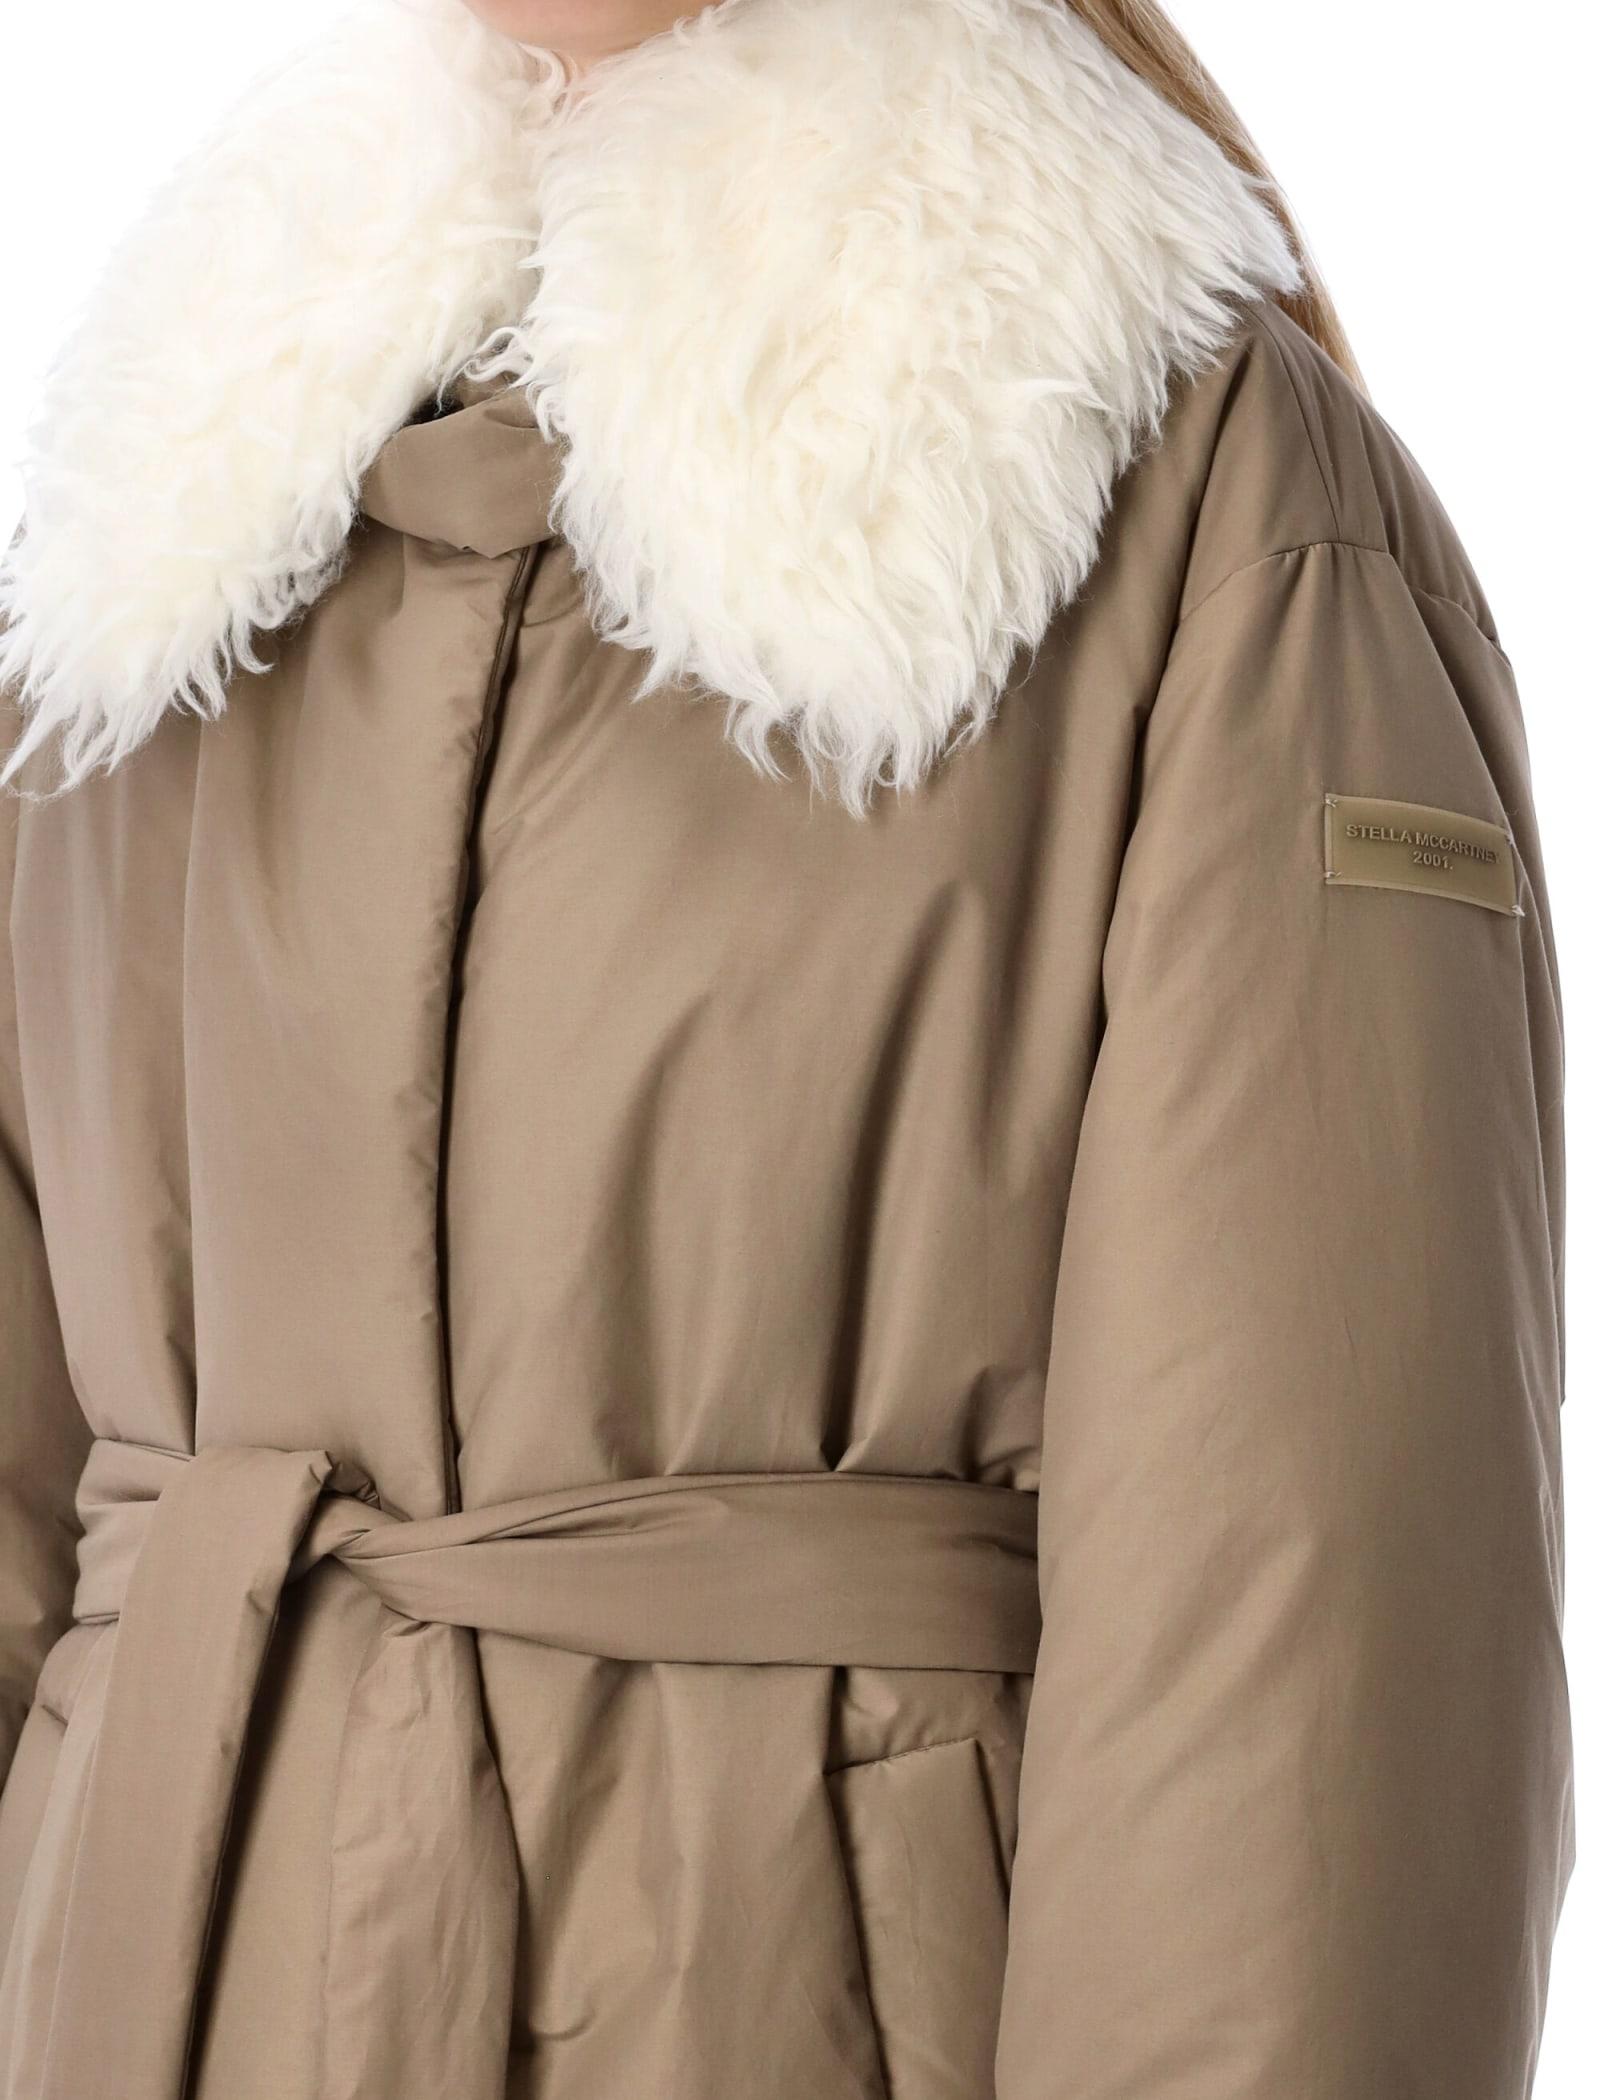 Stella McCartney Cotton Padded Parka in Taupe - Save 49% Womens Clothing Coats Parka coats Natural 